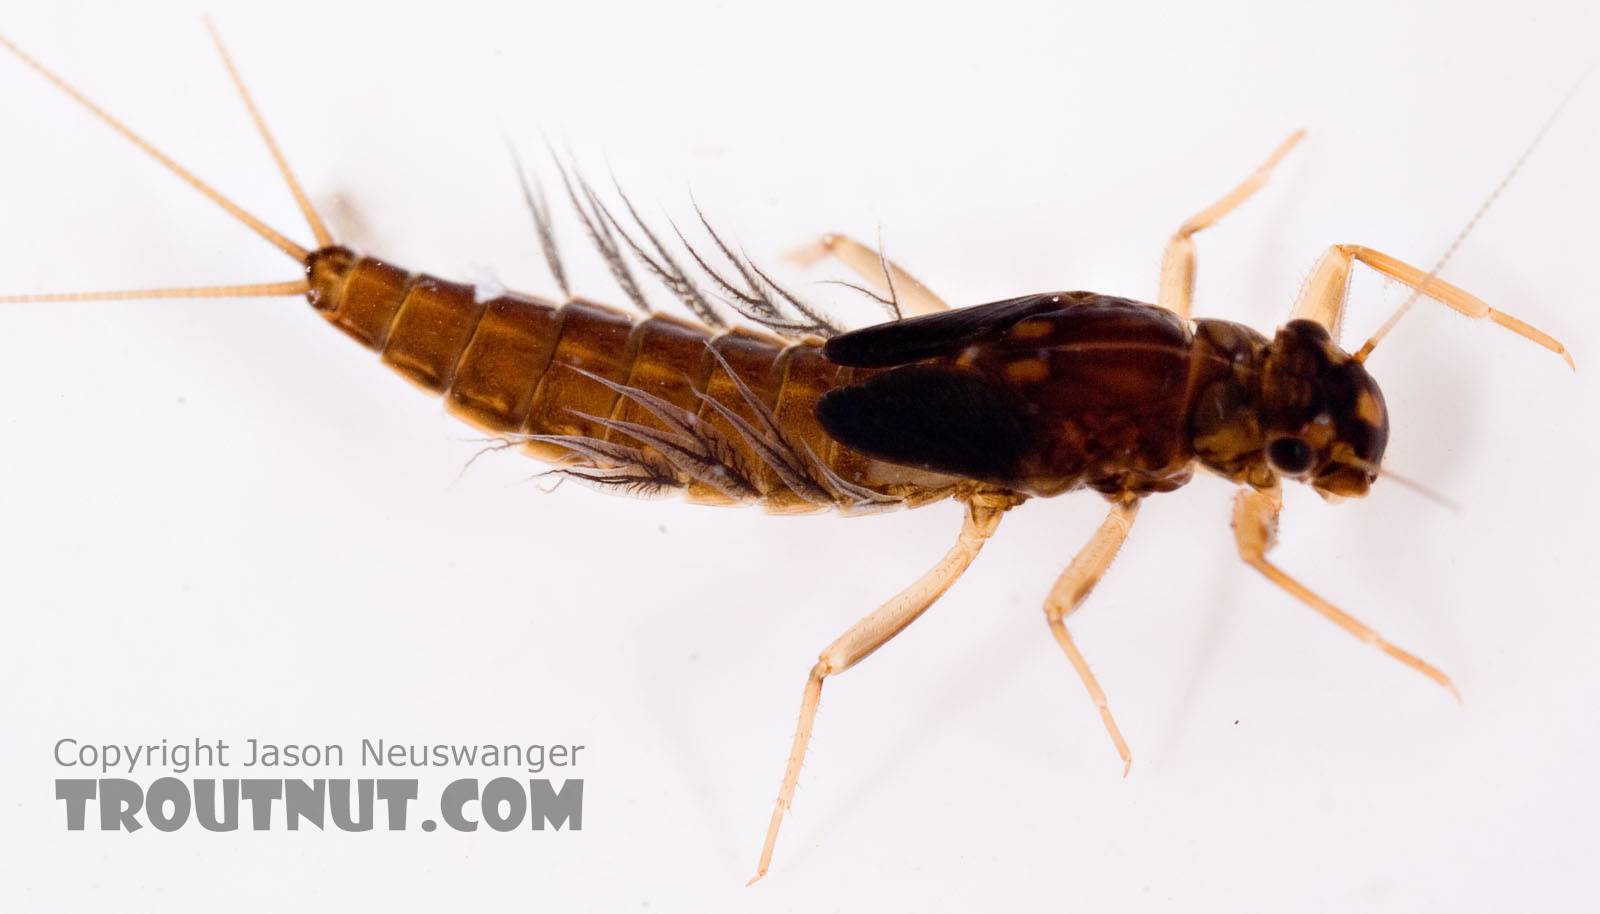 Neoleptophlebia Mayfly Nymph from Mongaup Creek in New York